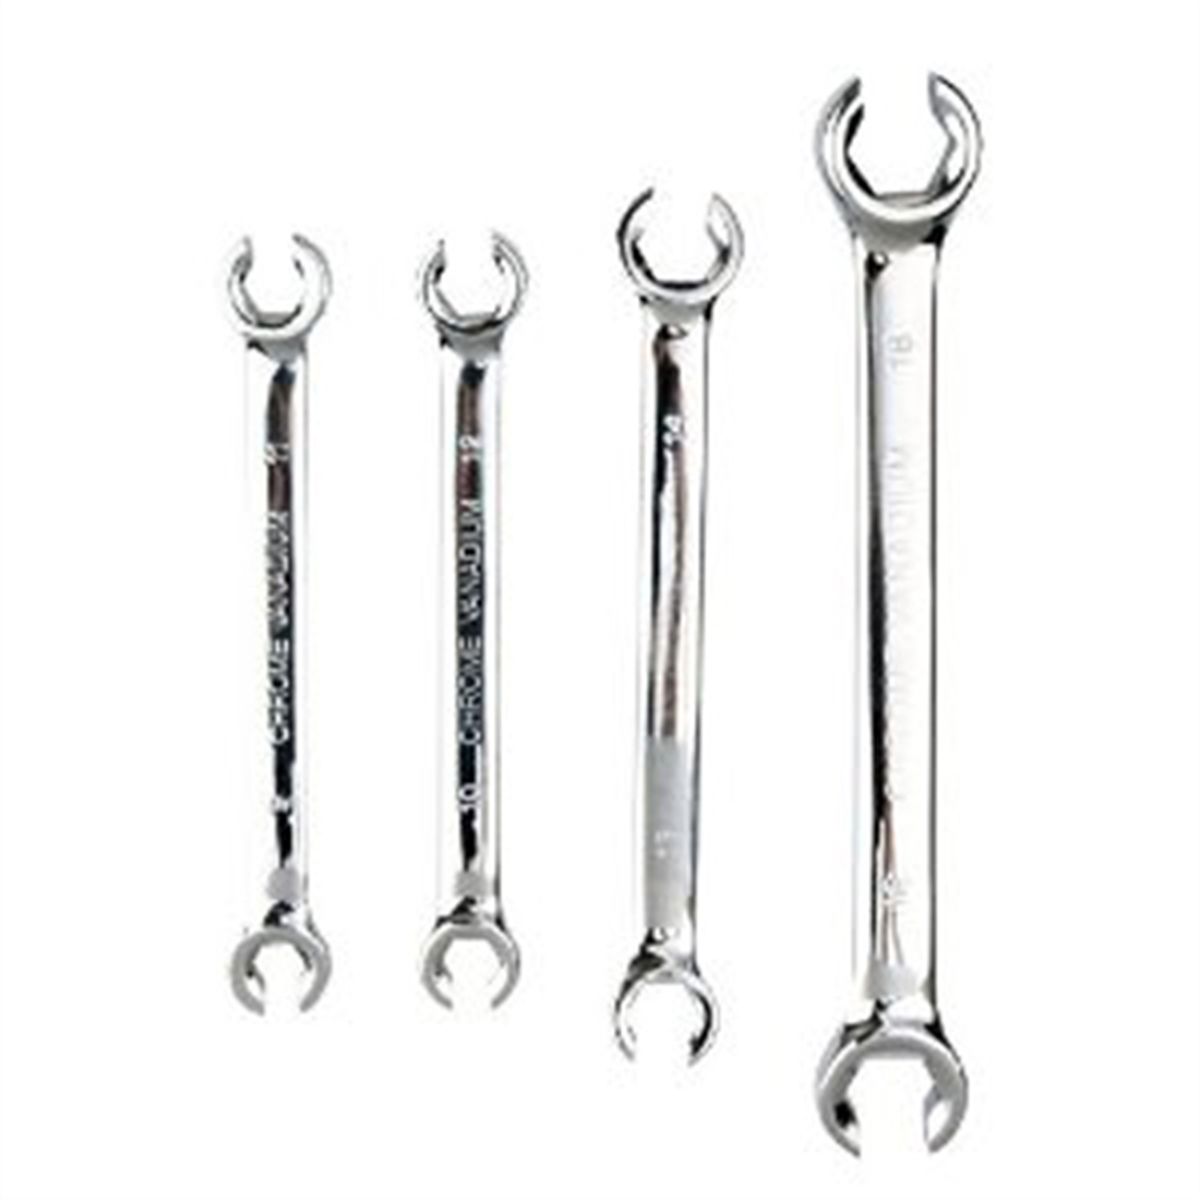 4 Pc Flare Nut Wrench Set Met